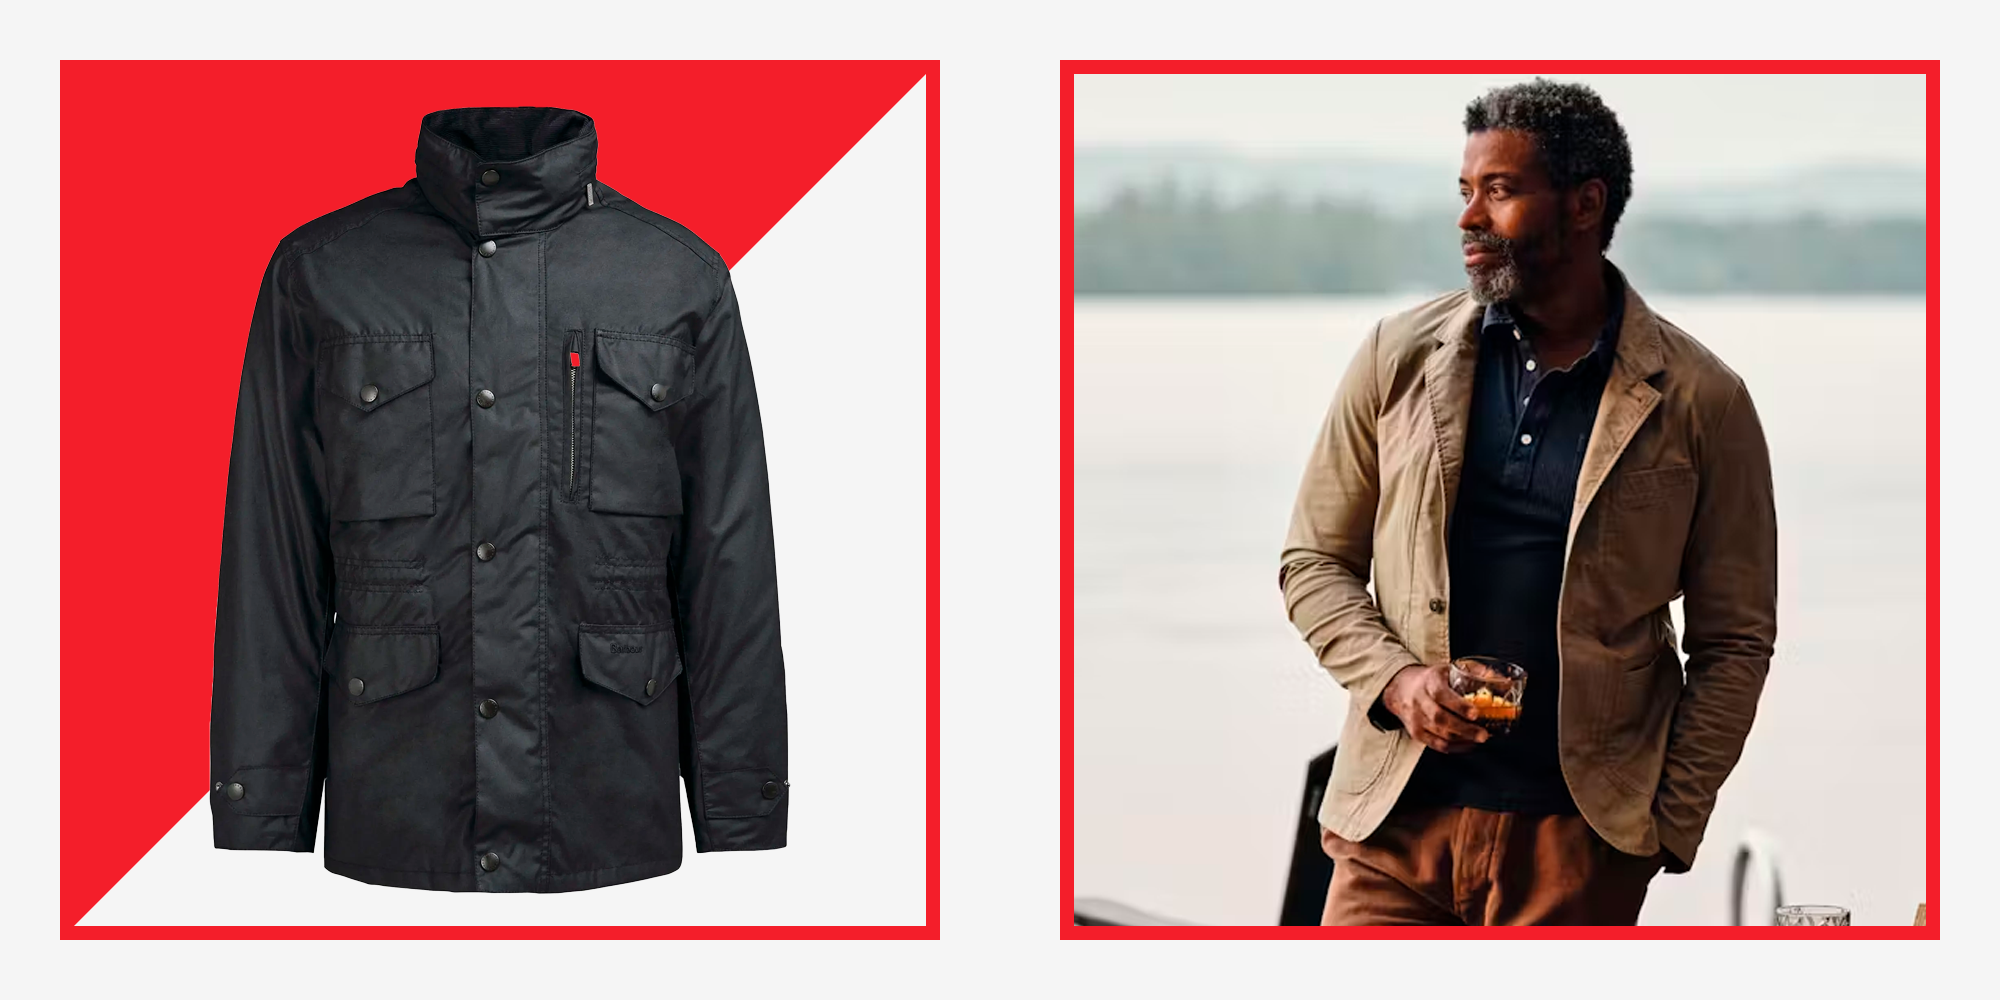 Men's Reversible Cotton Jacket with Pockets - Double Sided Wear for Autumn  Outdoor Activities